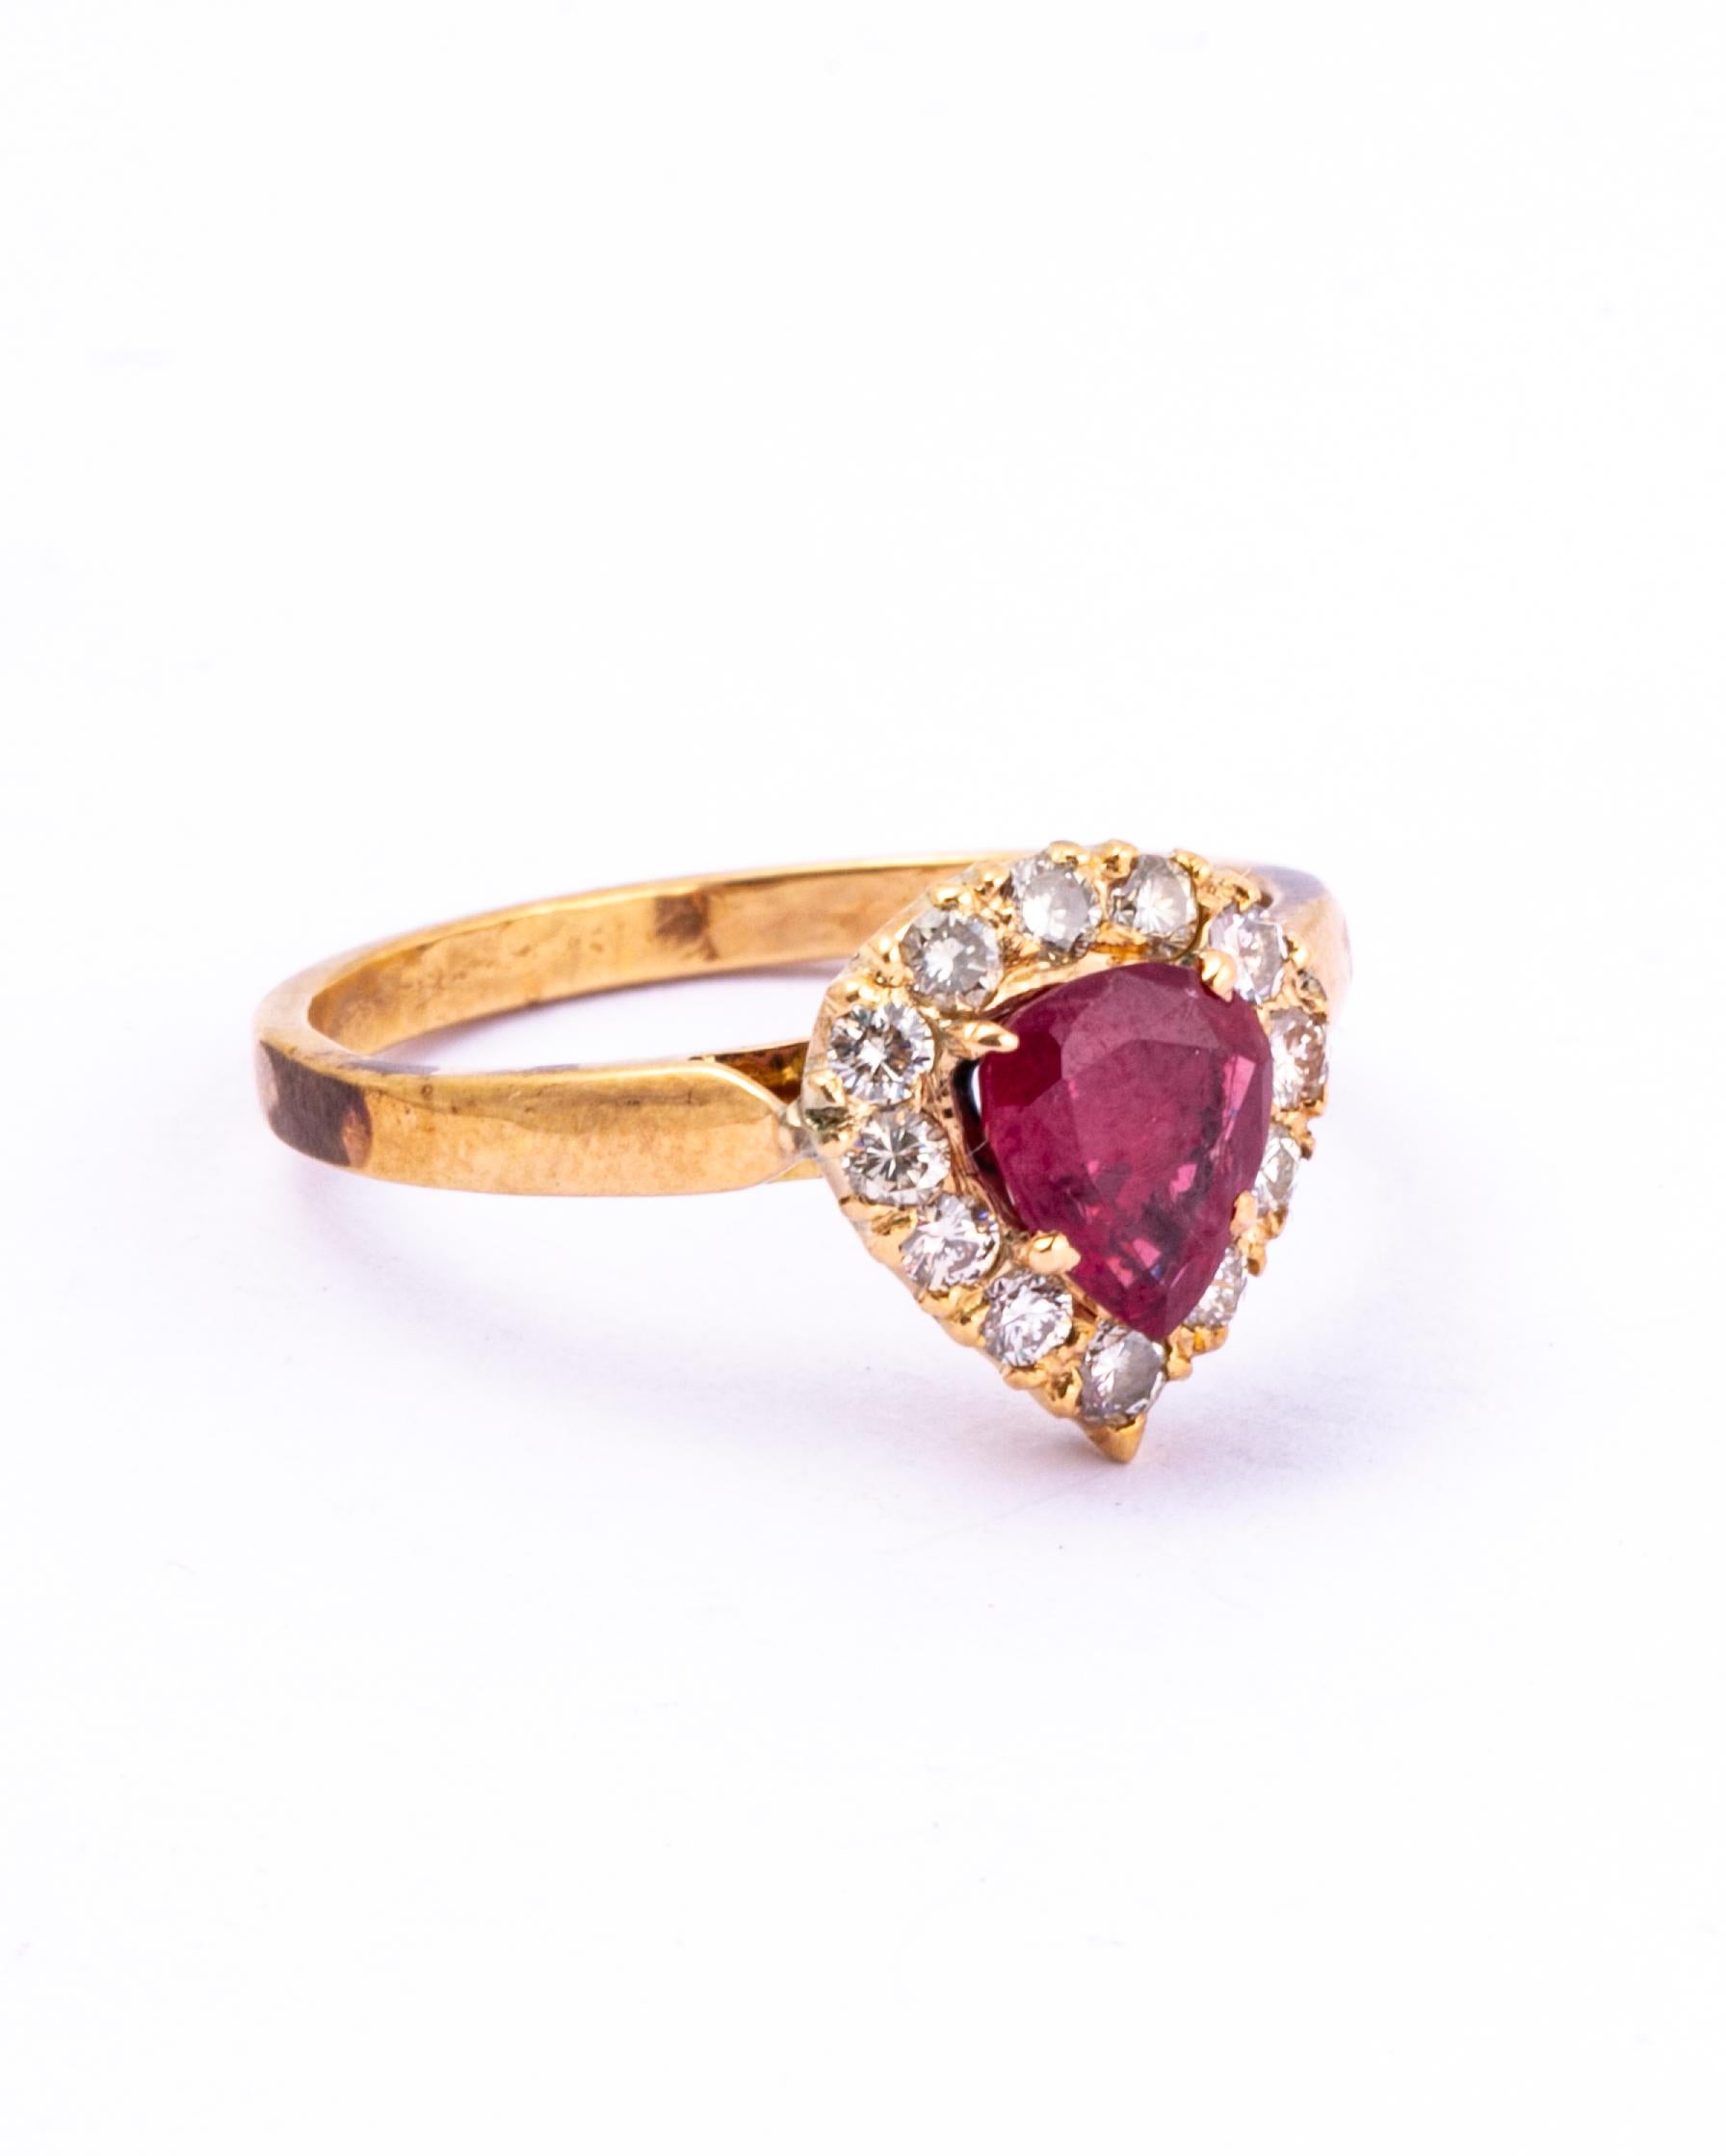 This gorgeous pear shaped ruby and diamond cluster has a heart shaped feel to it. The diamonds are bright and sparkling and the ring is modelled in 9 Carat Gold. 

Ring Size: N 1/2 or 7 
Cluster Dimensions: 10x10

Weight: 2.7g